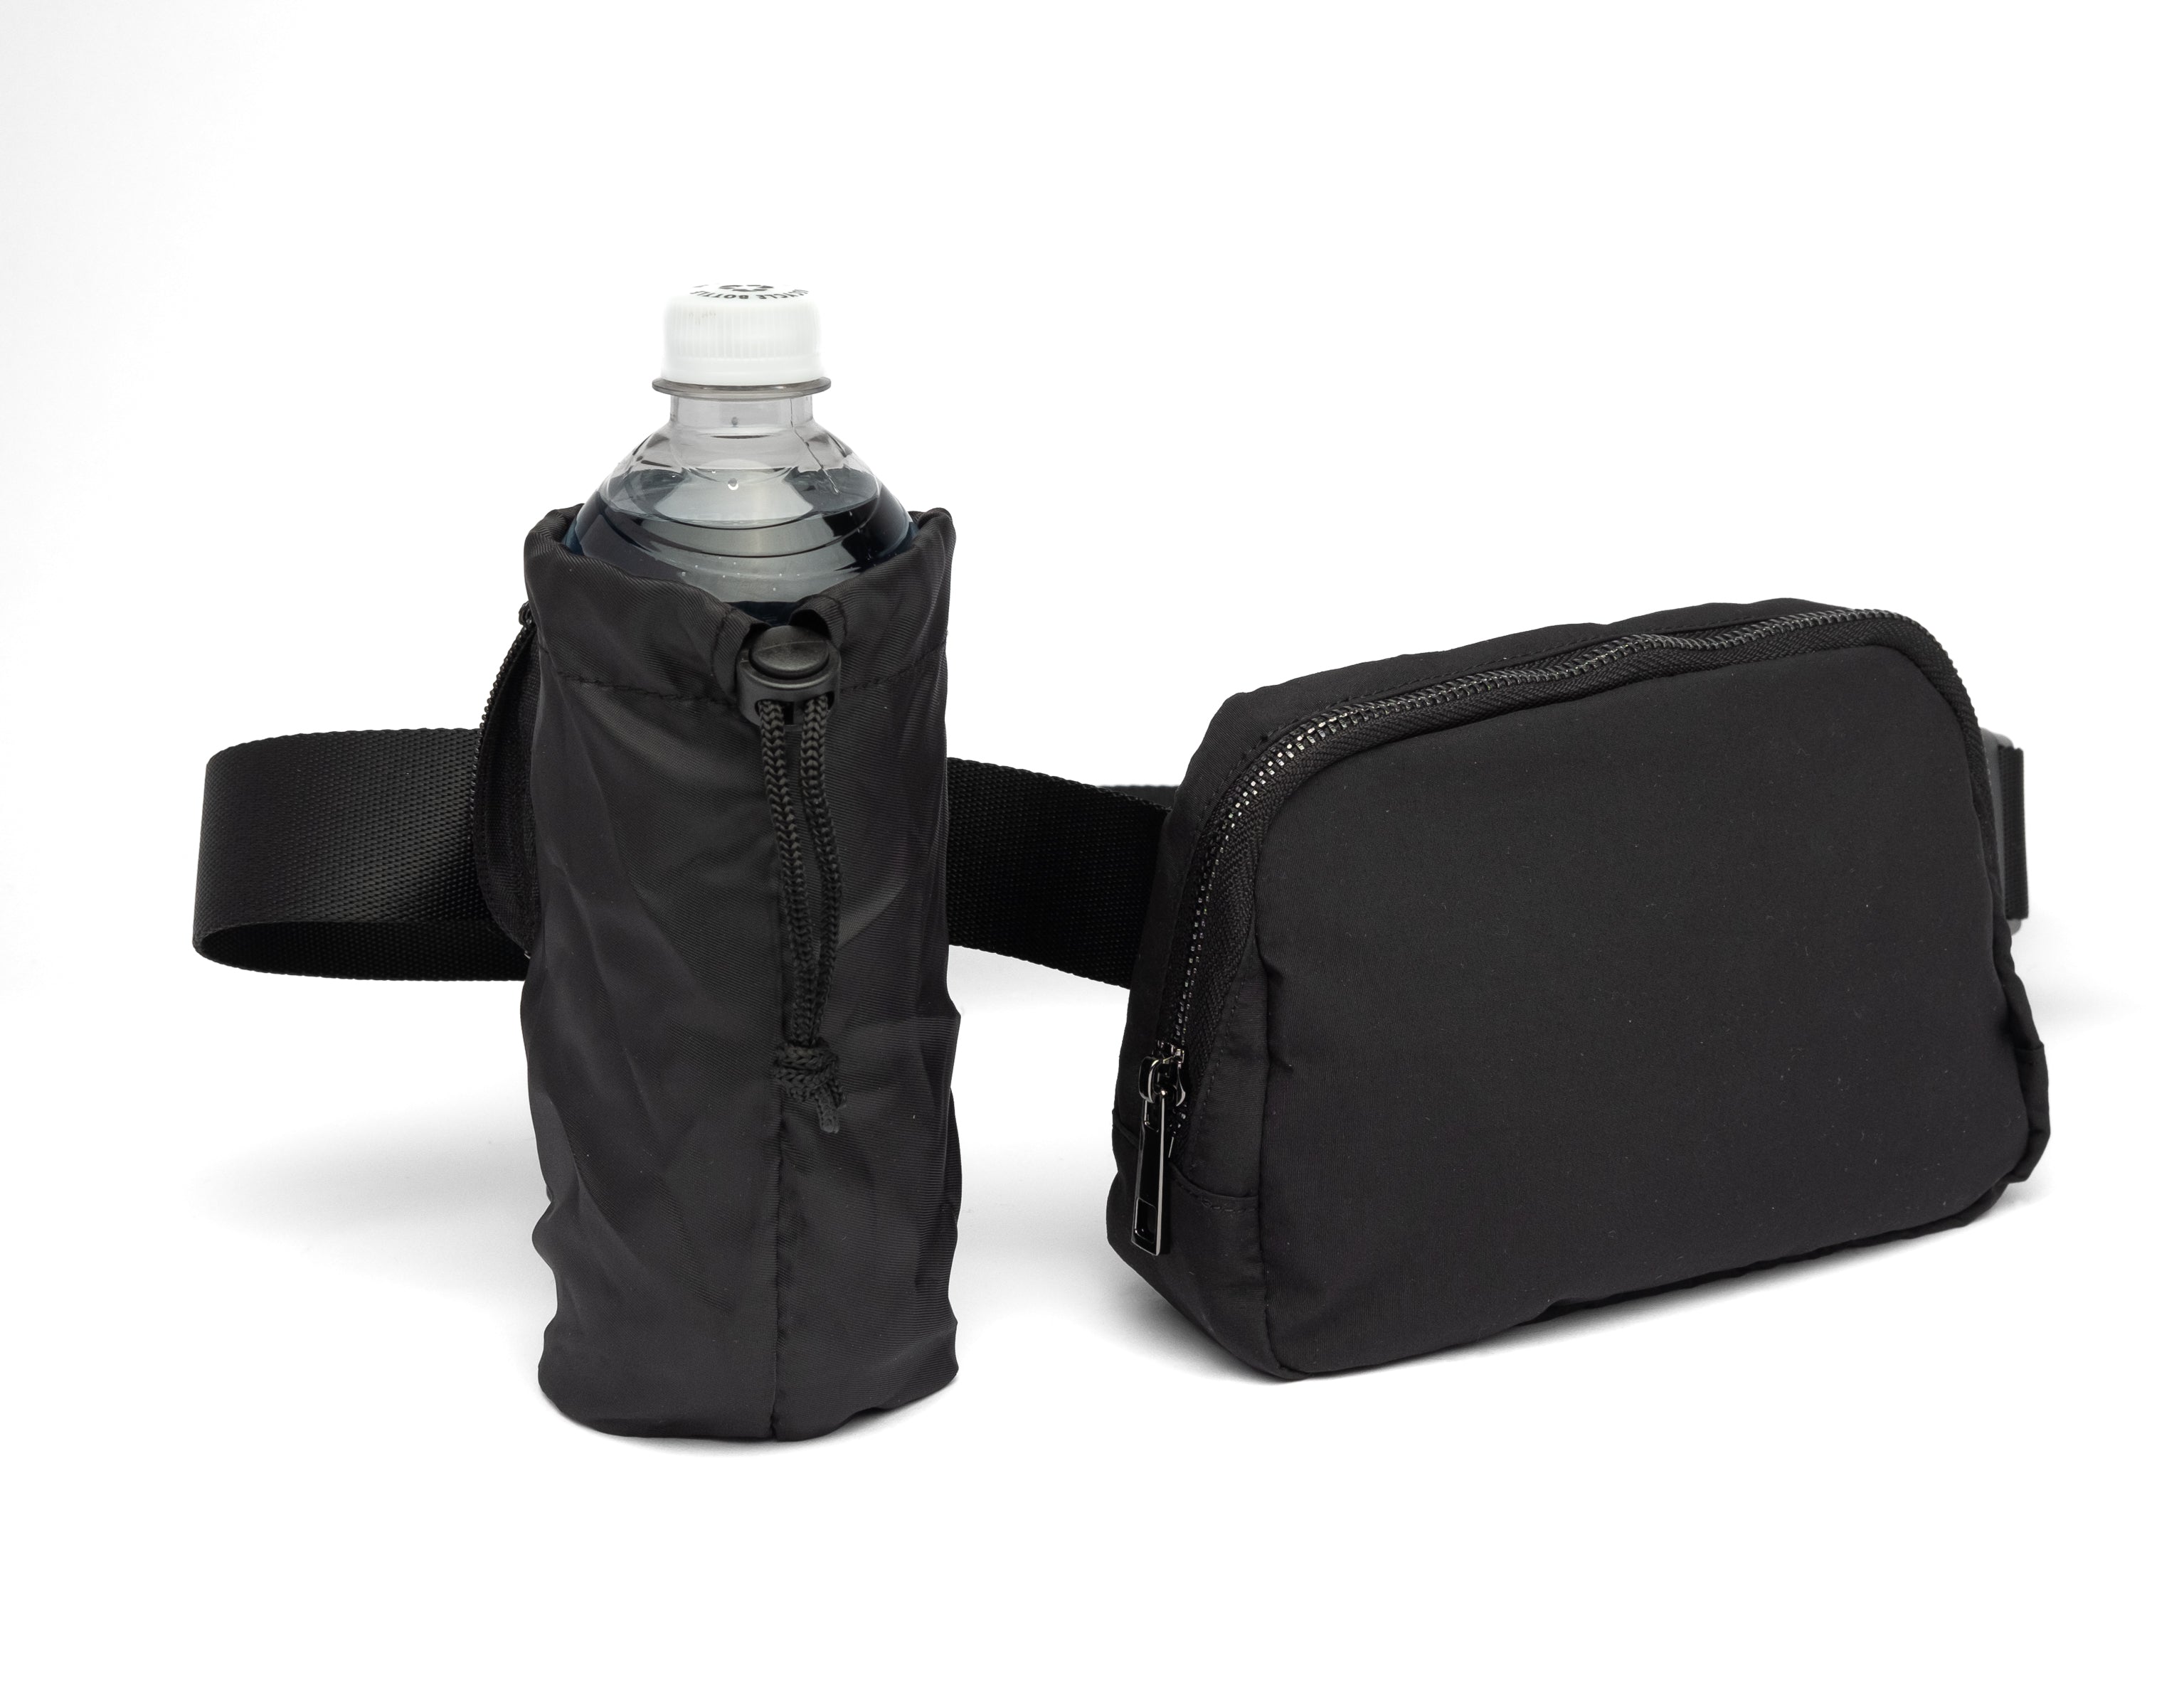 Black HydroBeltbag with Removable HydroHolster